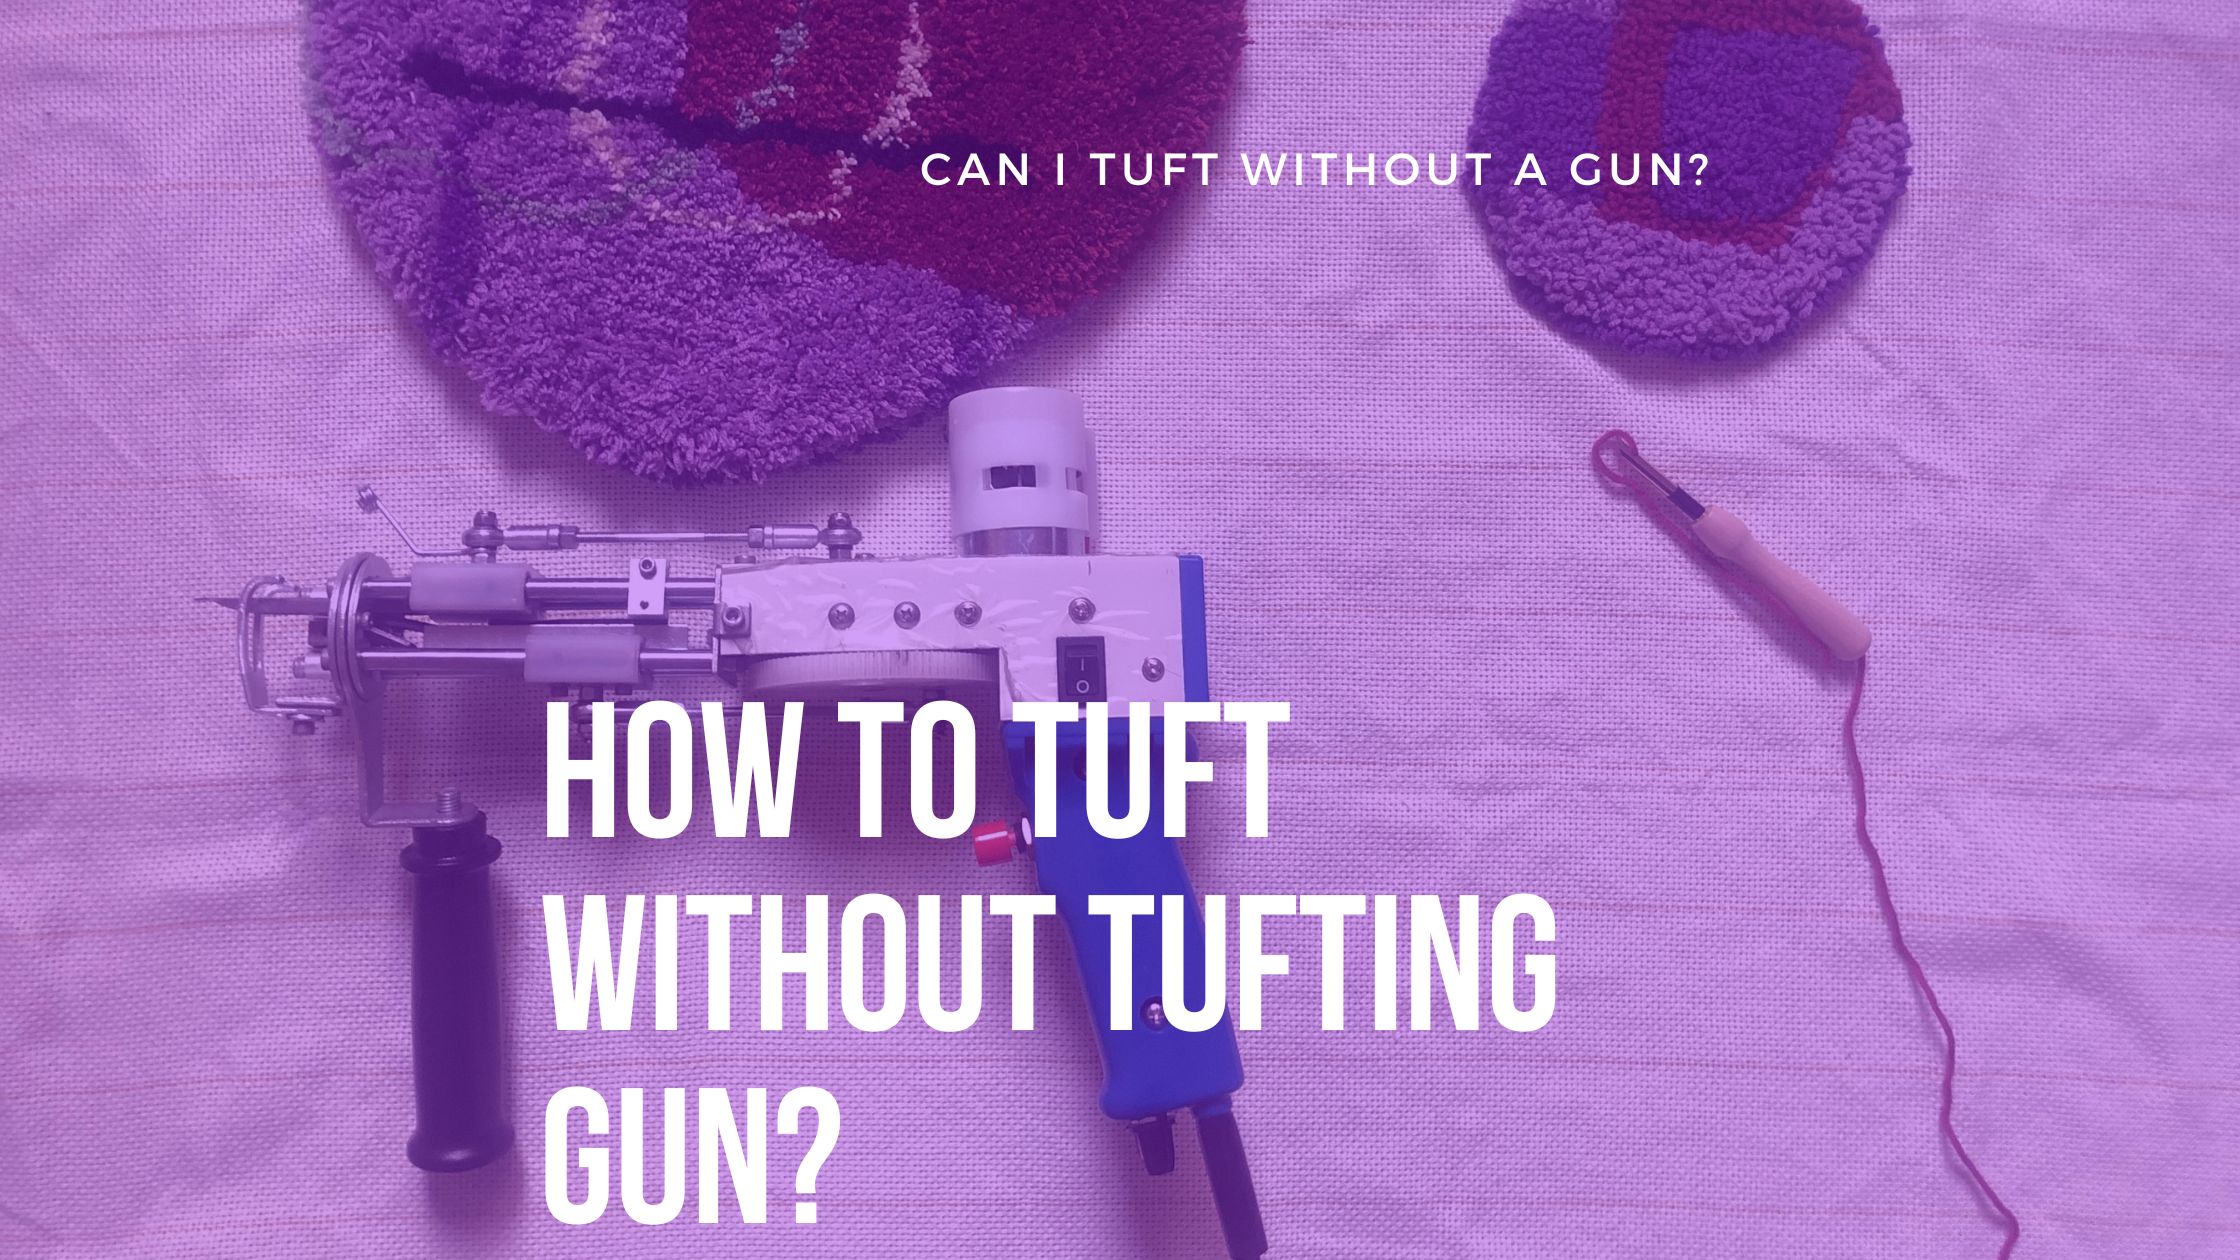 How To Tuft Without Tufting Gun?